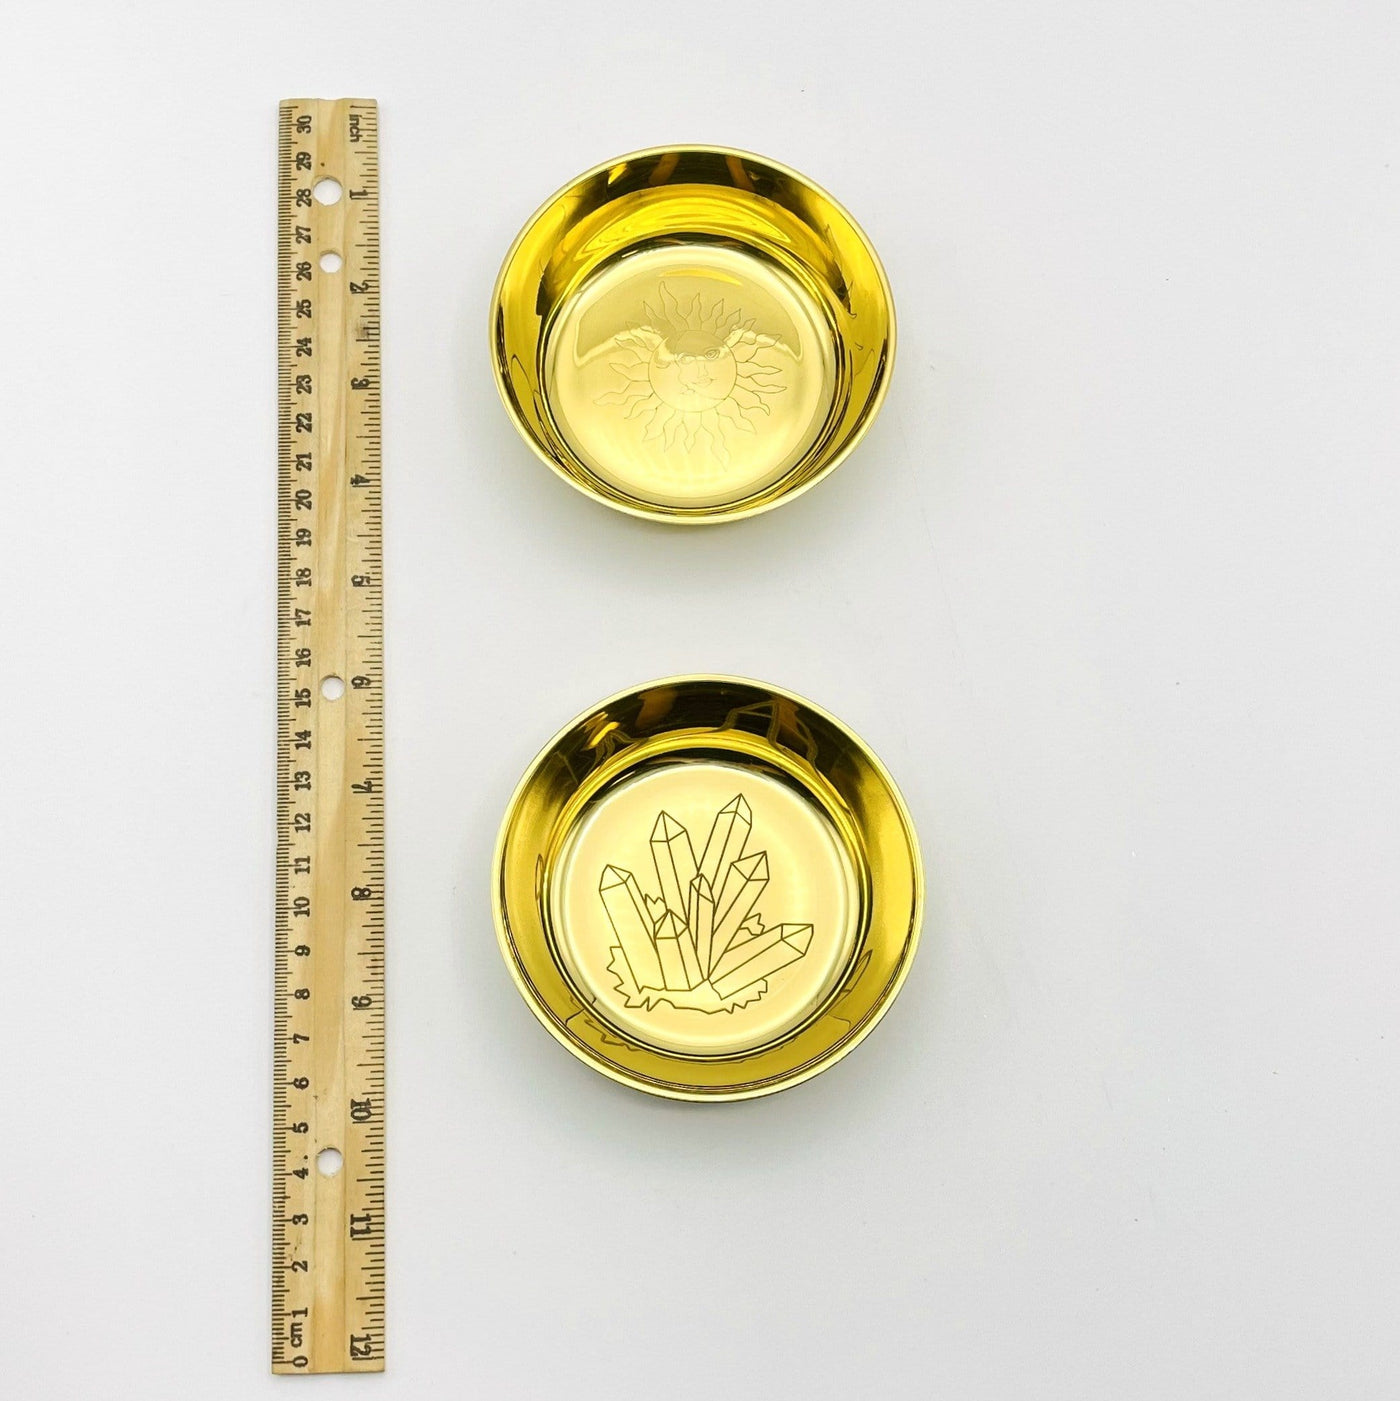 Brass Offering Bowls in both sun and moon and crystals next to ruler for size comparison